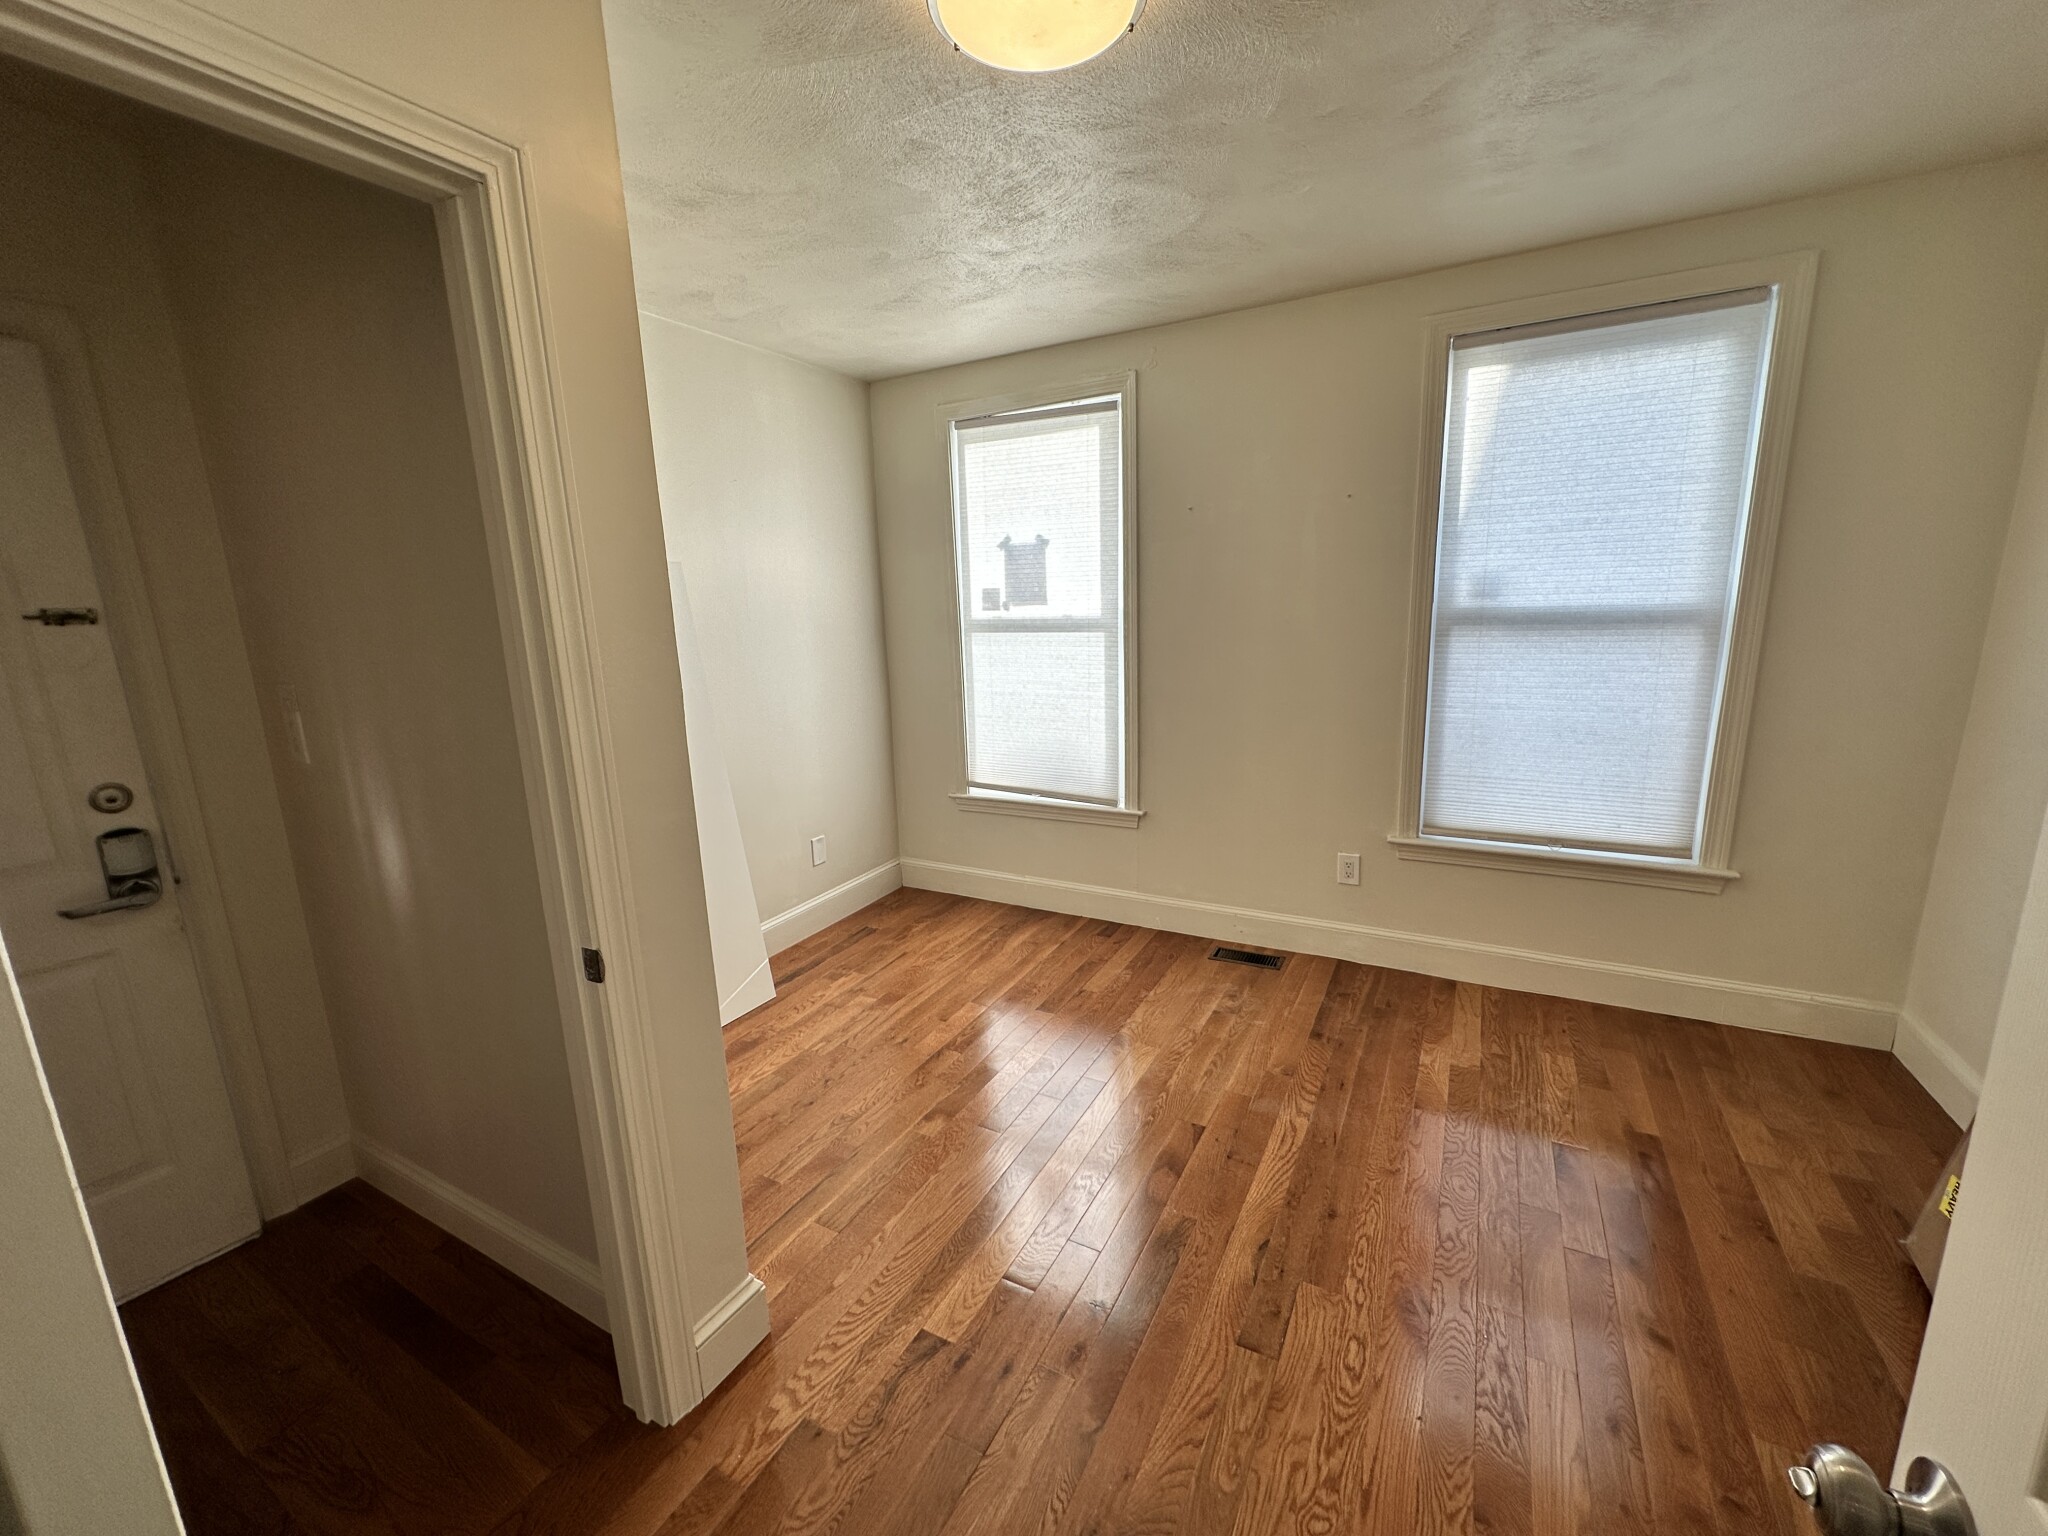 Photos of apartment on West 8th St.,Boston MA 02127